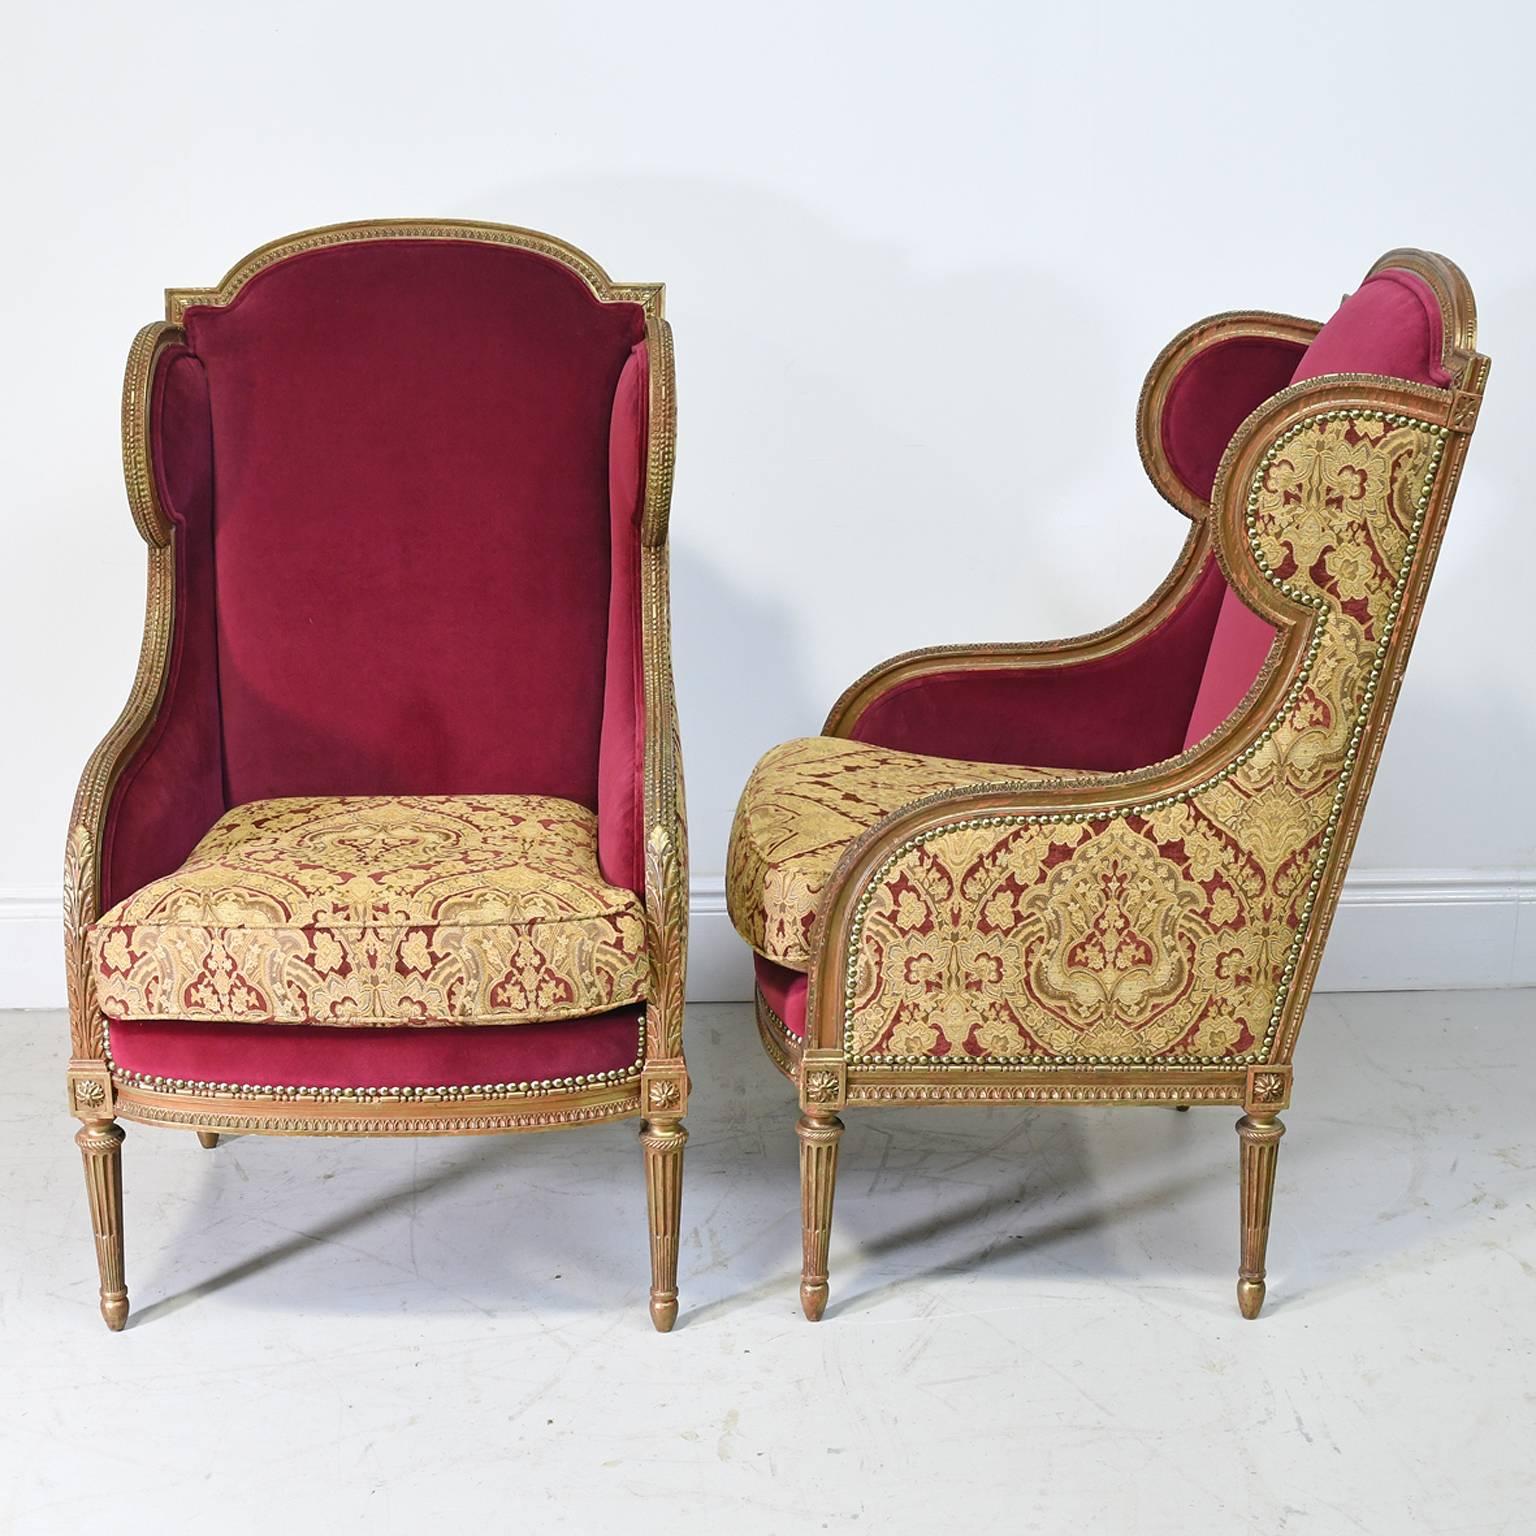 A beautiful and well-proportioned pair of French Louis XVI style bergeres in a light walnut-colored paint over gilded wood with carved acanthus motif, with wingback and resting on turned and fluted legs. Offers upholstered seat back and sides.